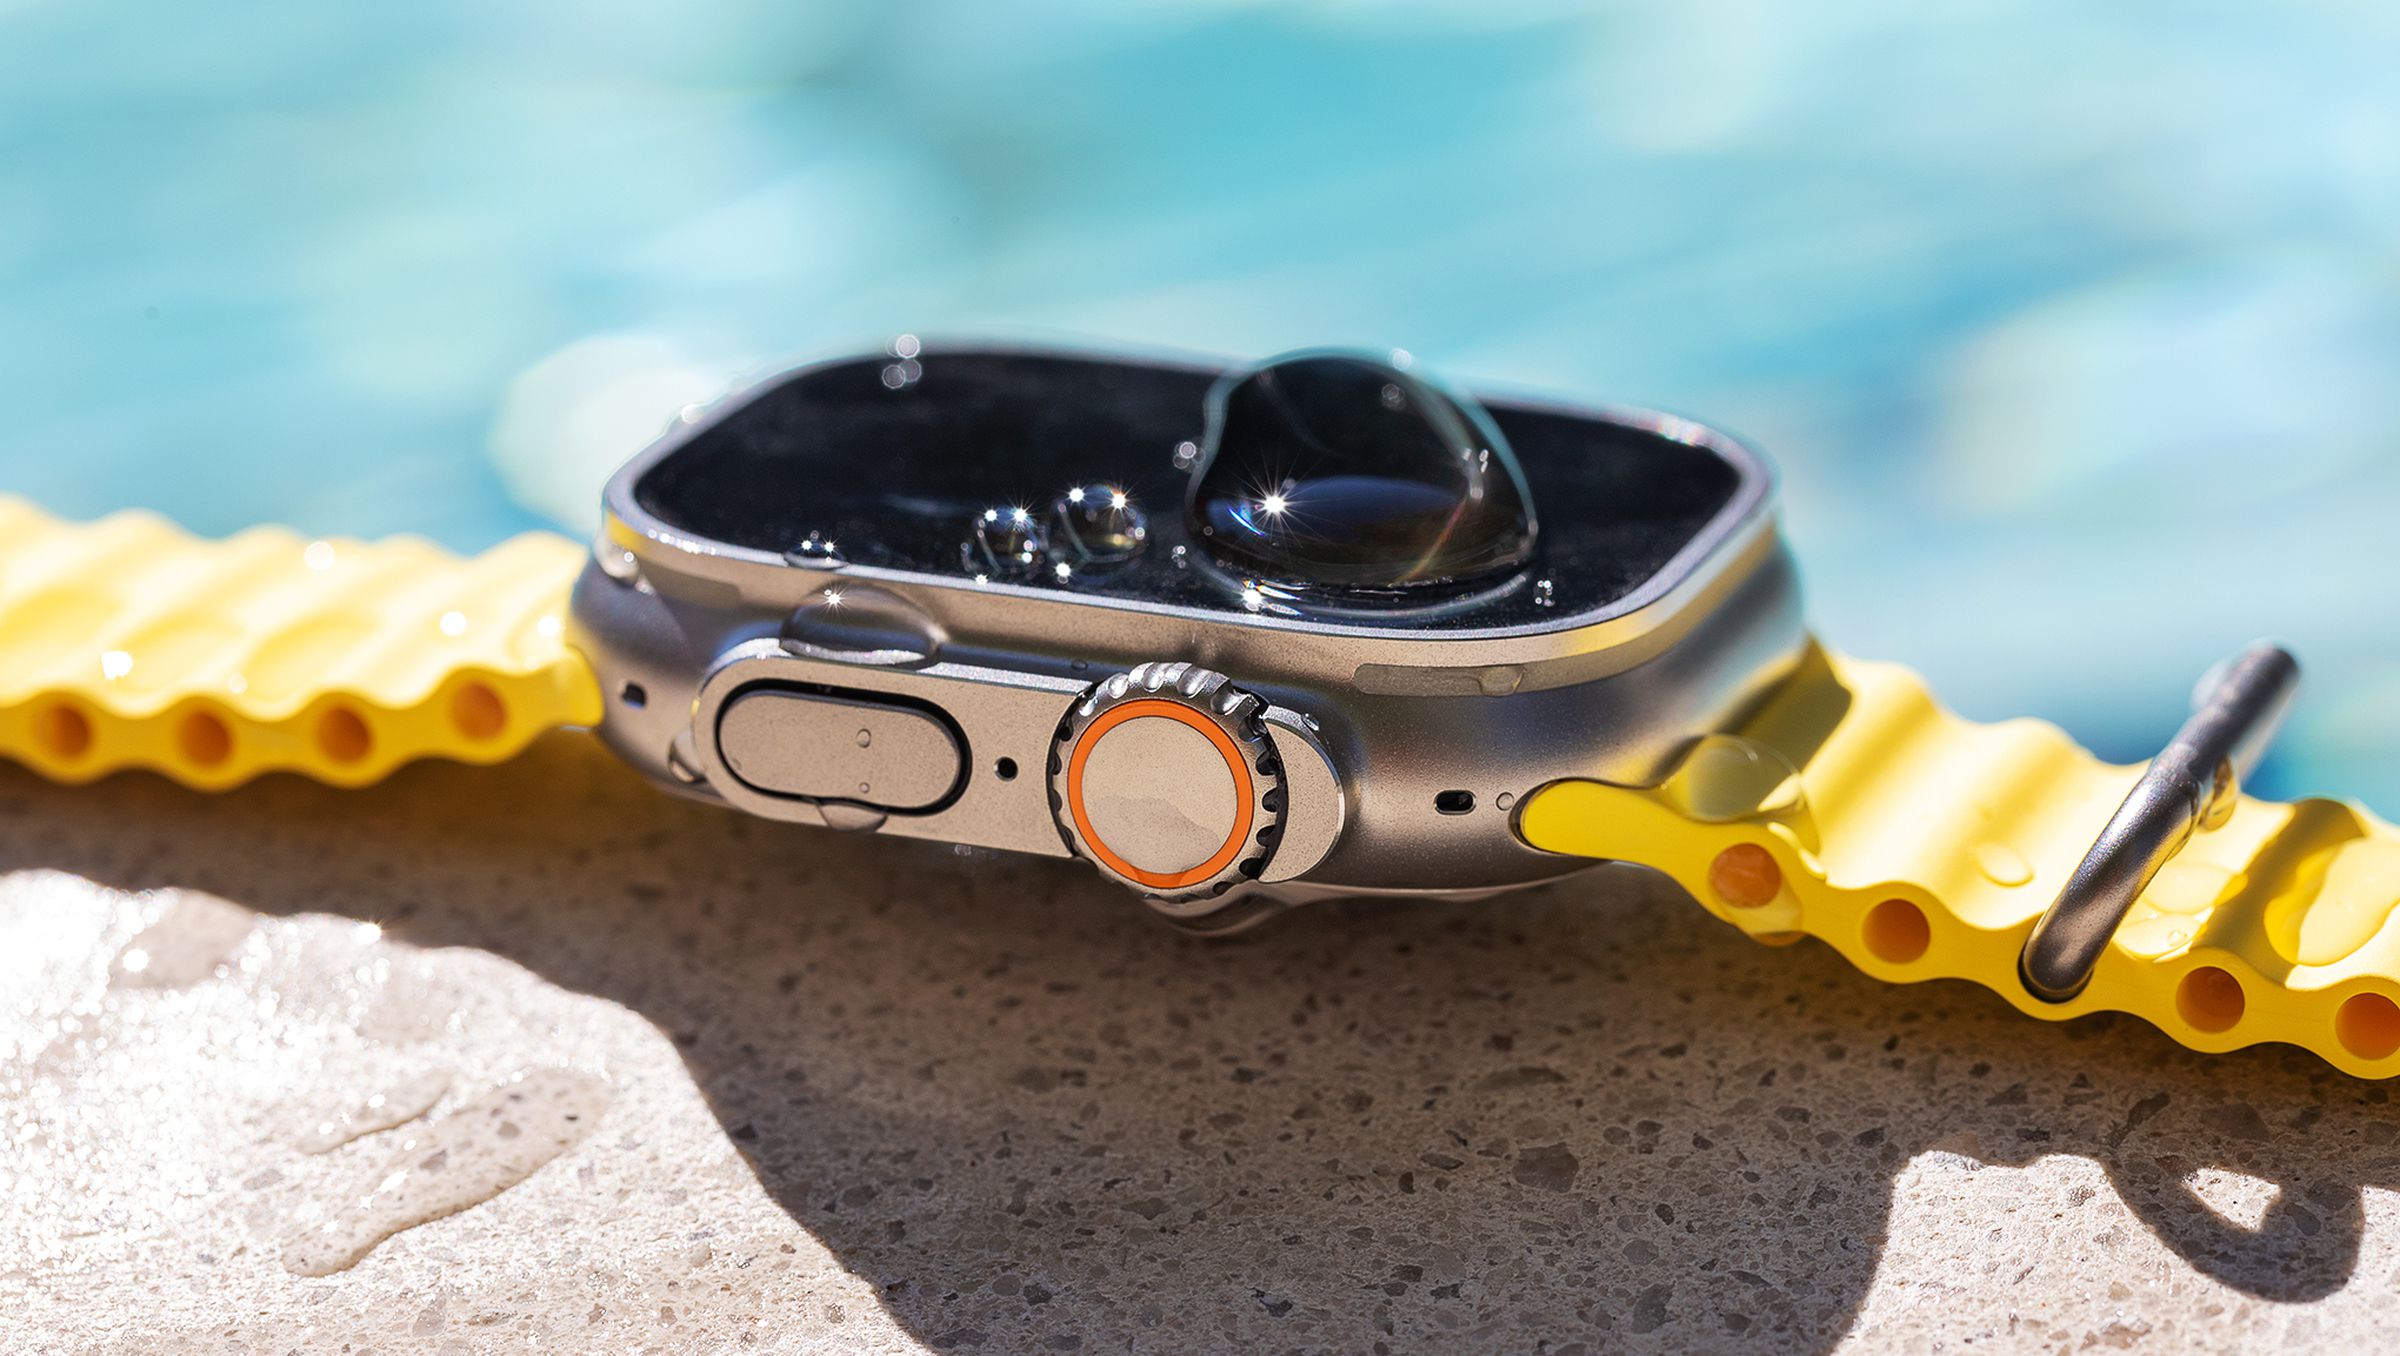 Side view of Apple Watch with Ocean band by the pool